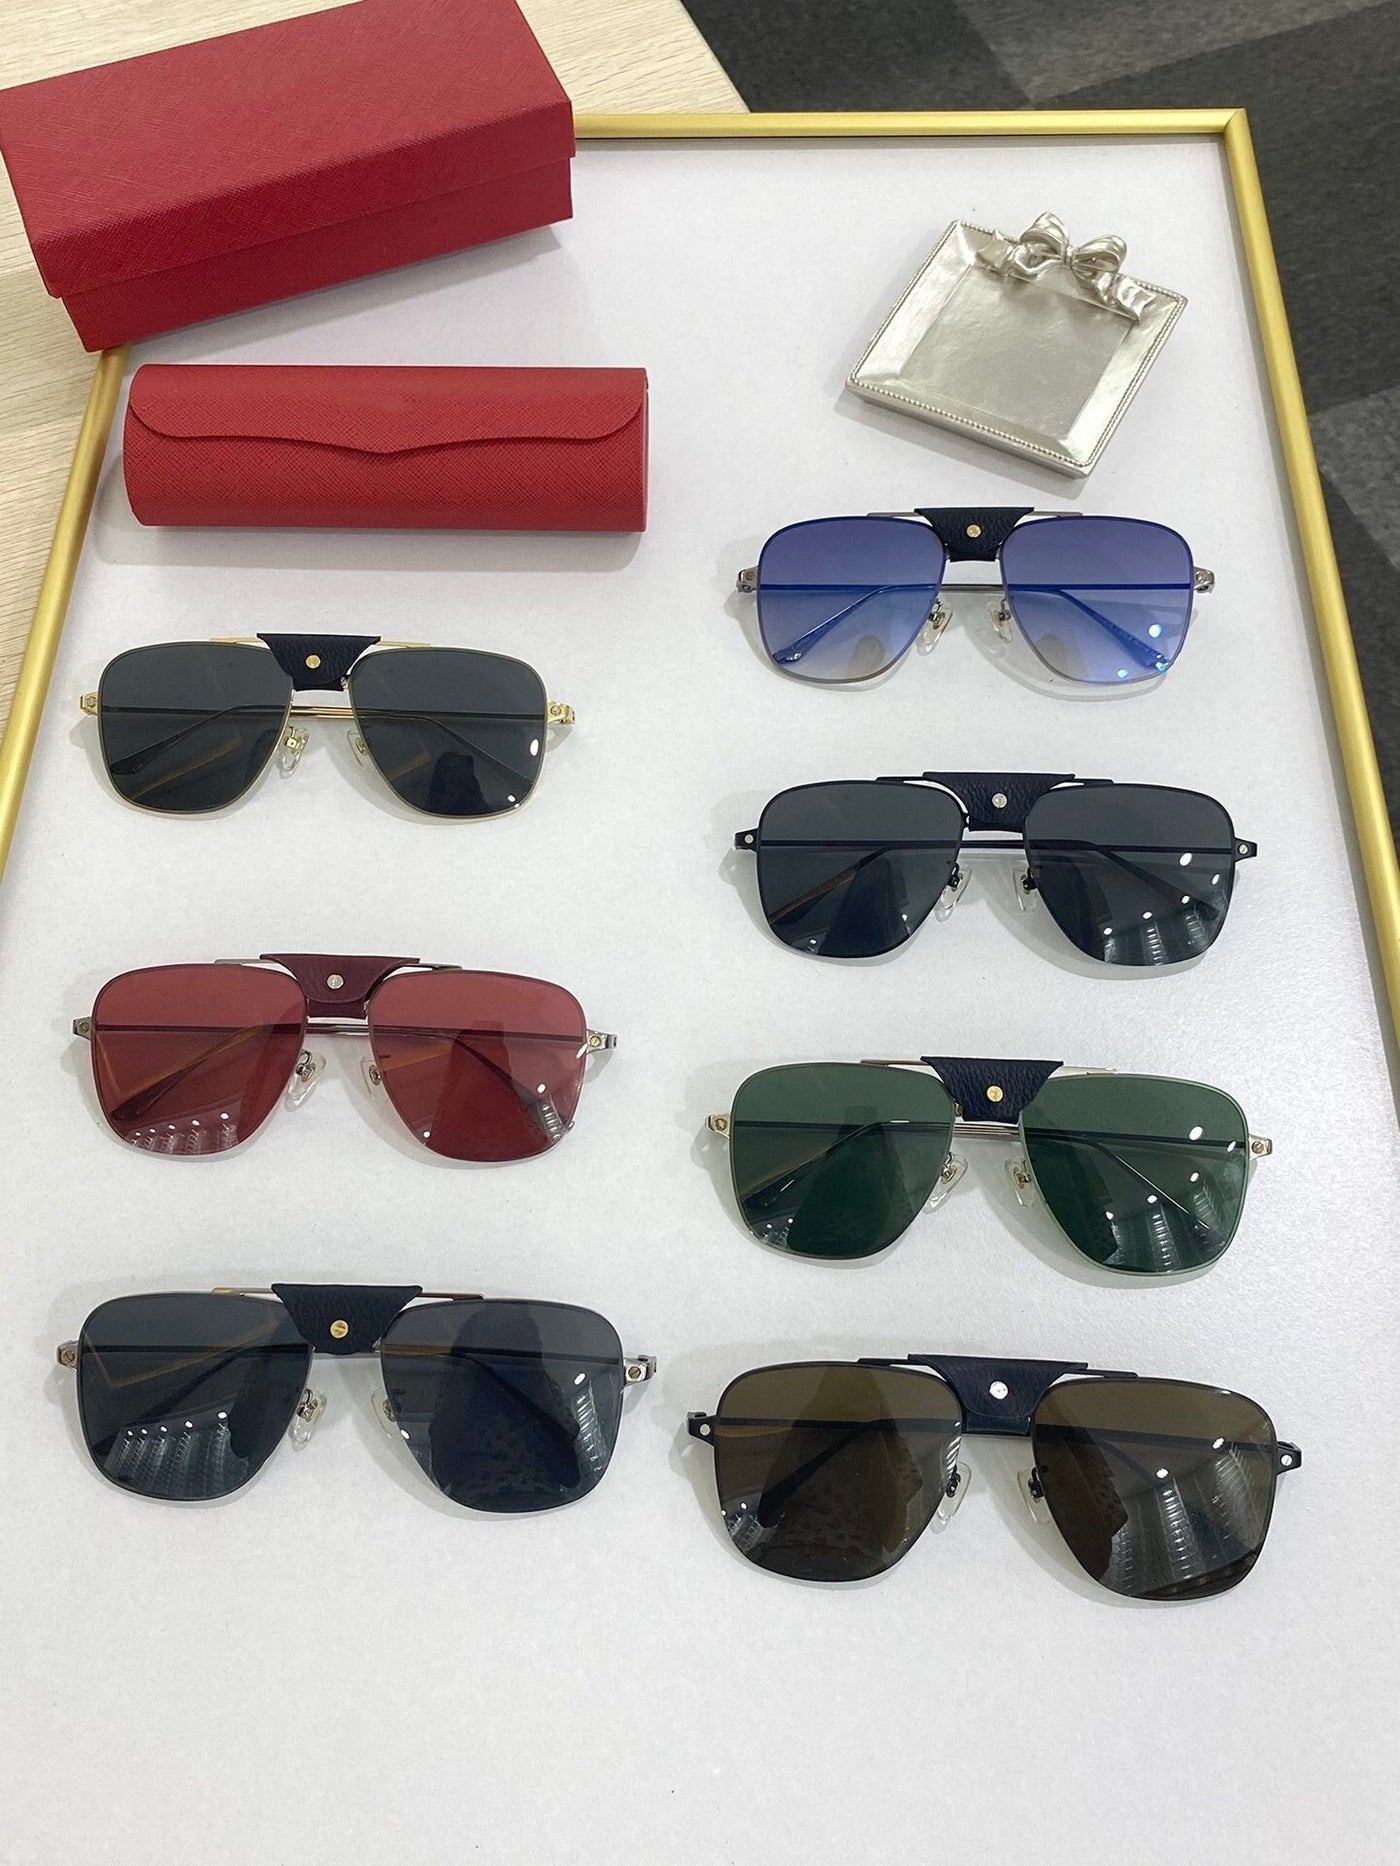 2021 Designer Brand Classic Square Metal Frame High Quality Stylish Vintage Retro Fashion Sunglasses For Men And Women-Unique and Classy